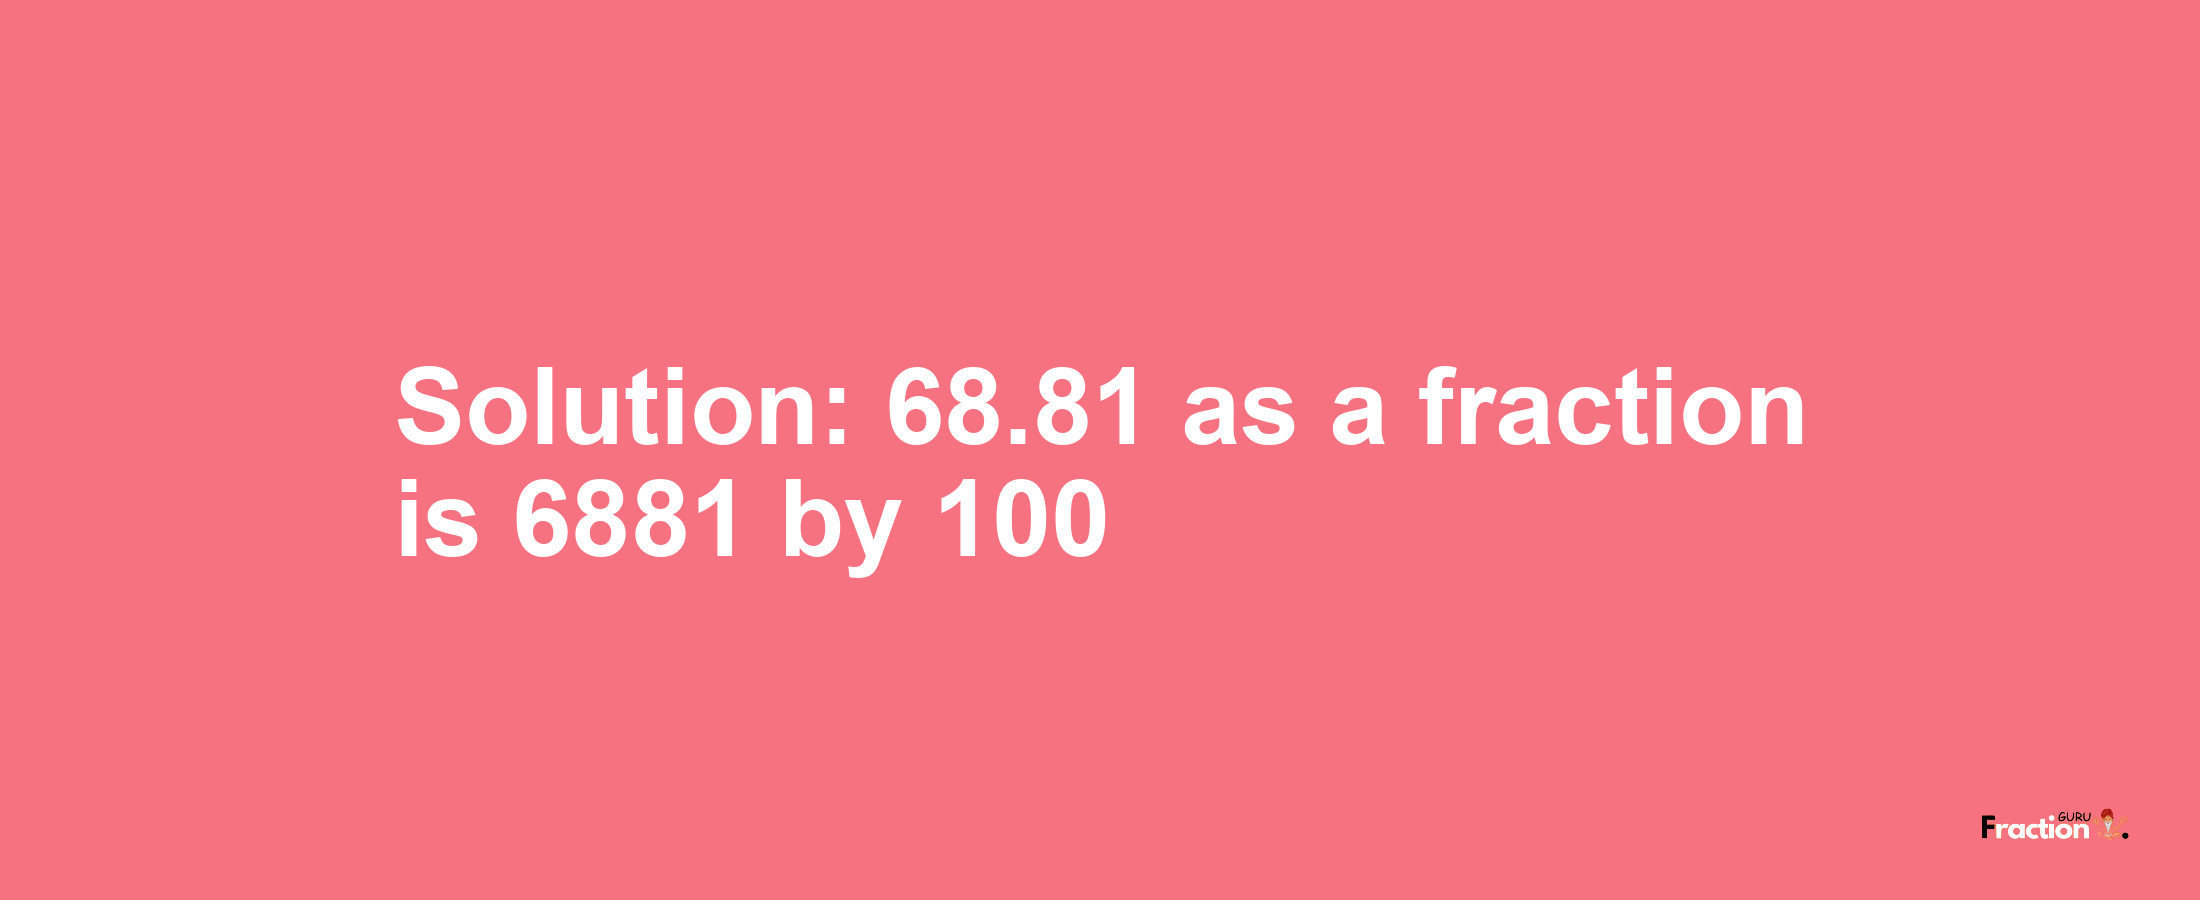 Solution:68.81 as a fraction is 6881/100